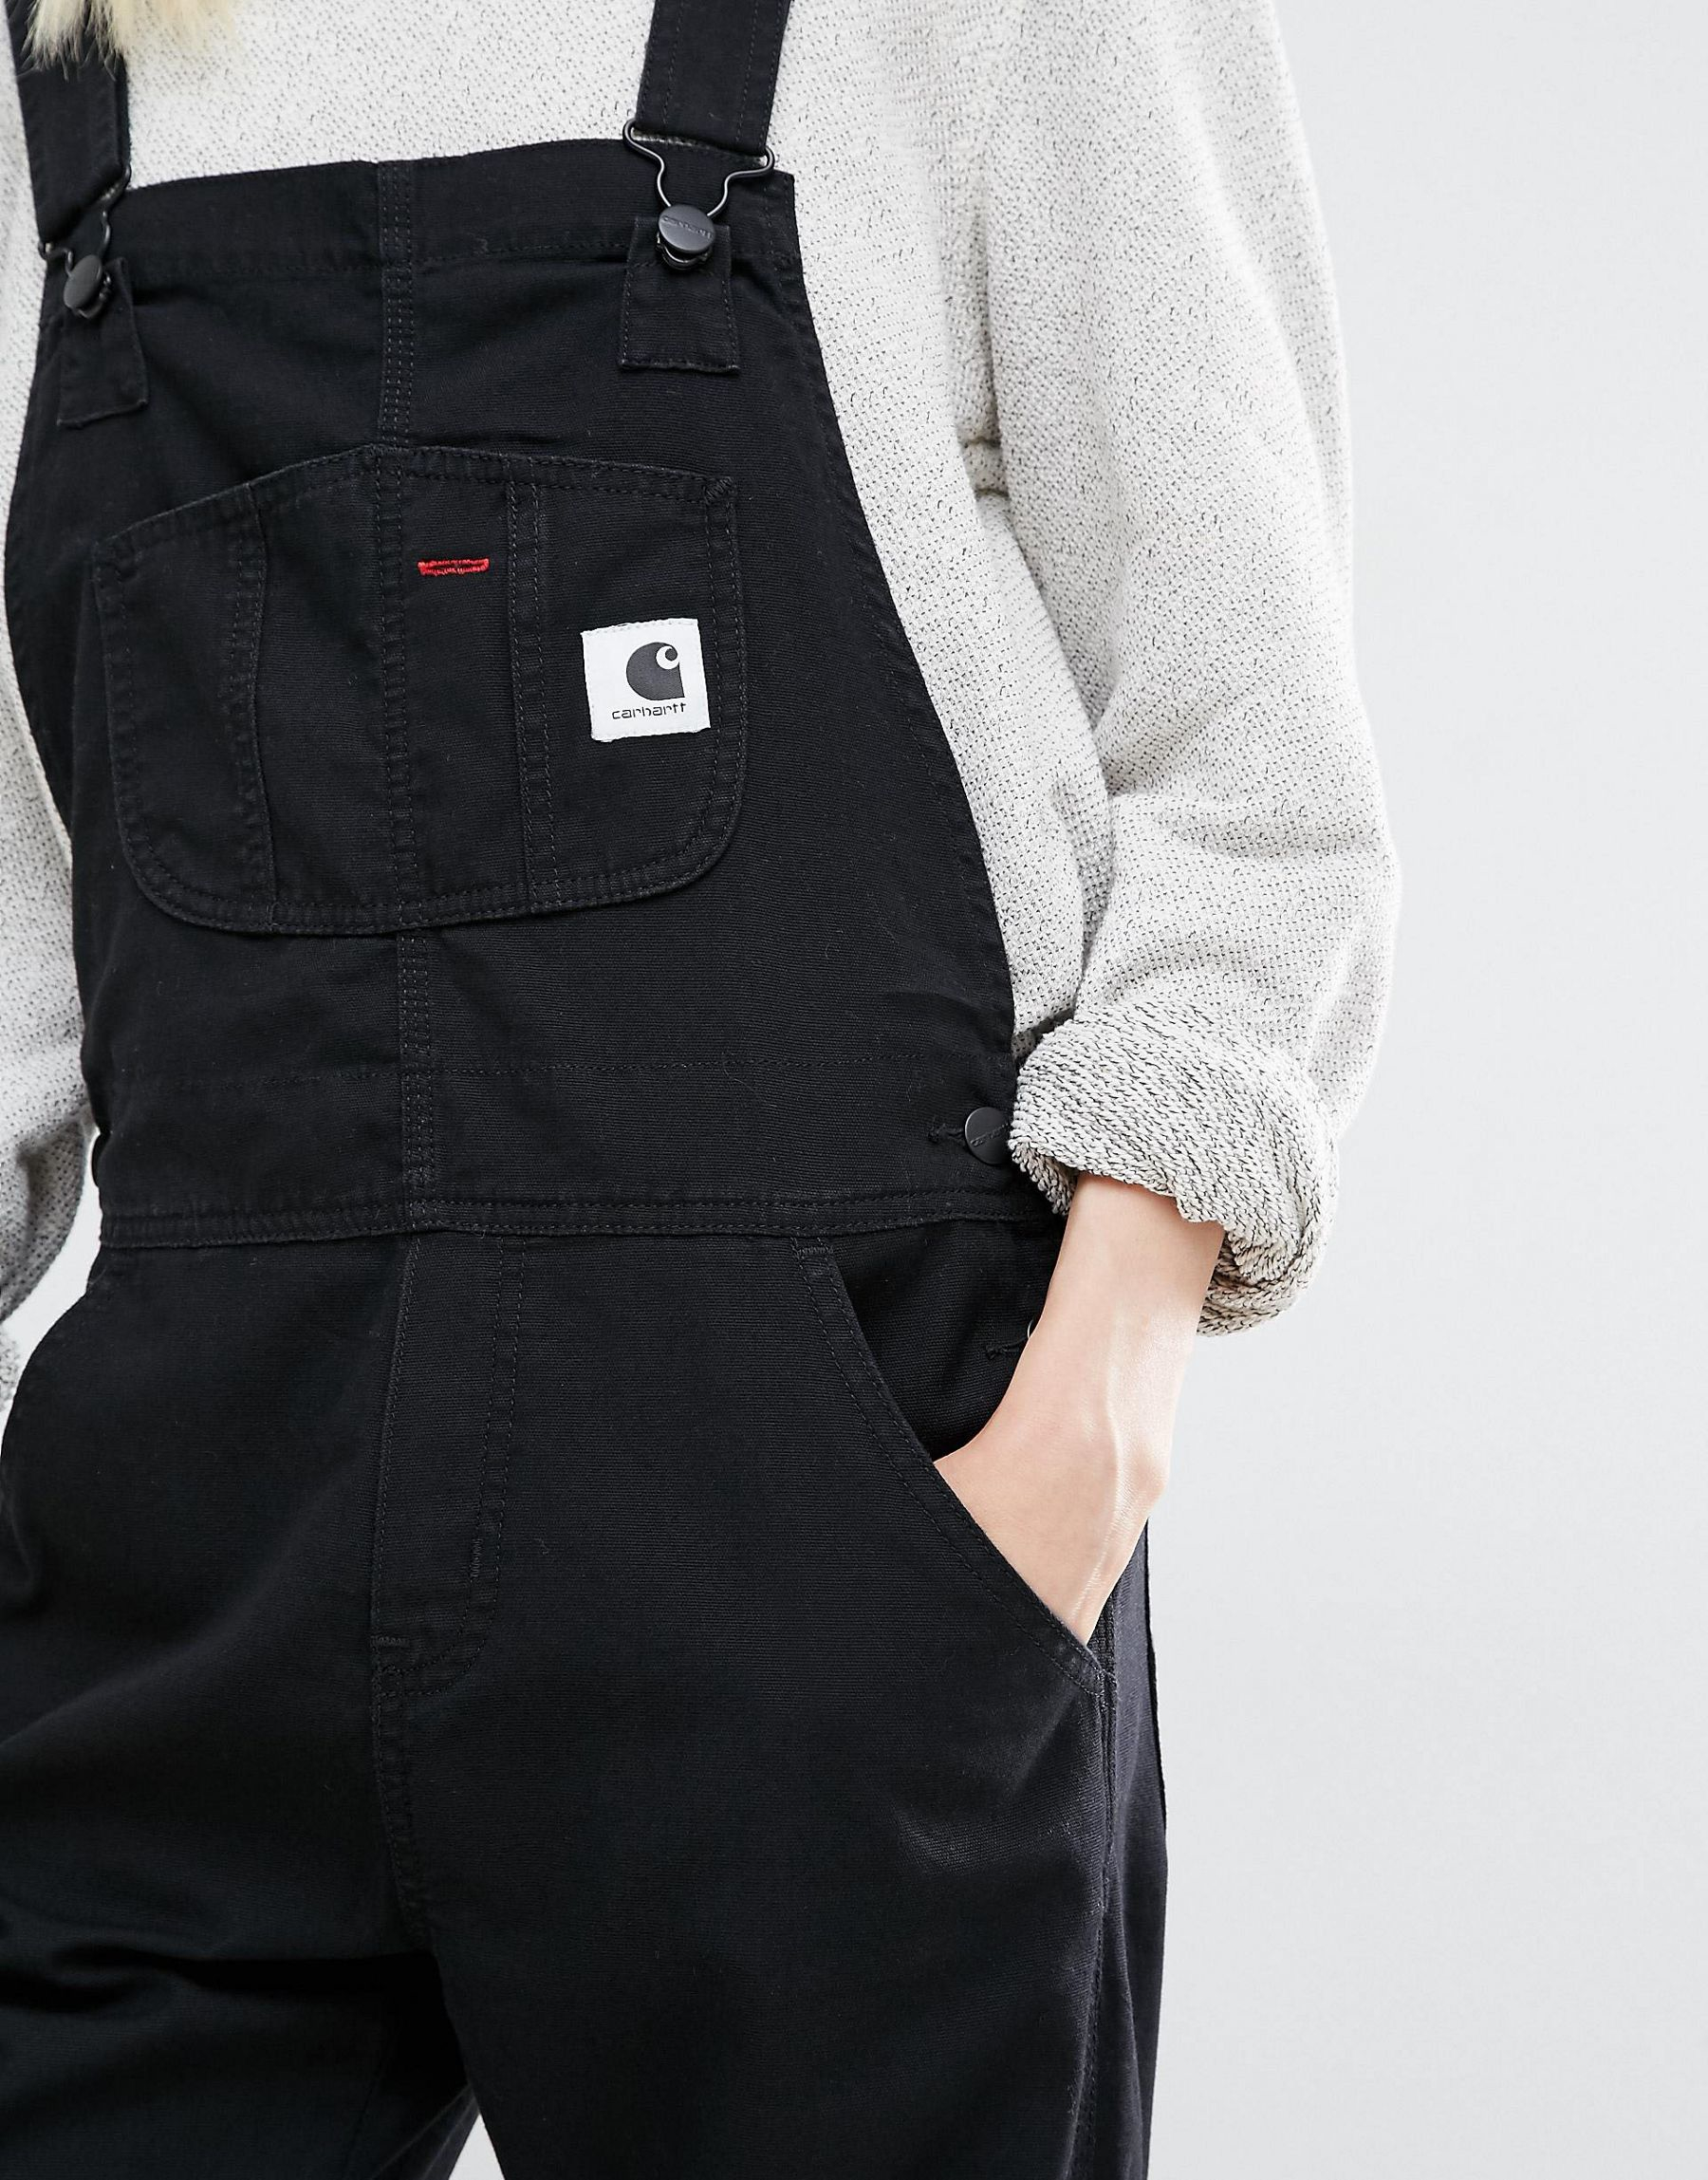 Carhartt WIP Bib Overall Dungarees With Front Logo in Black | Lyst Canada